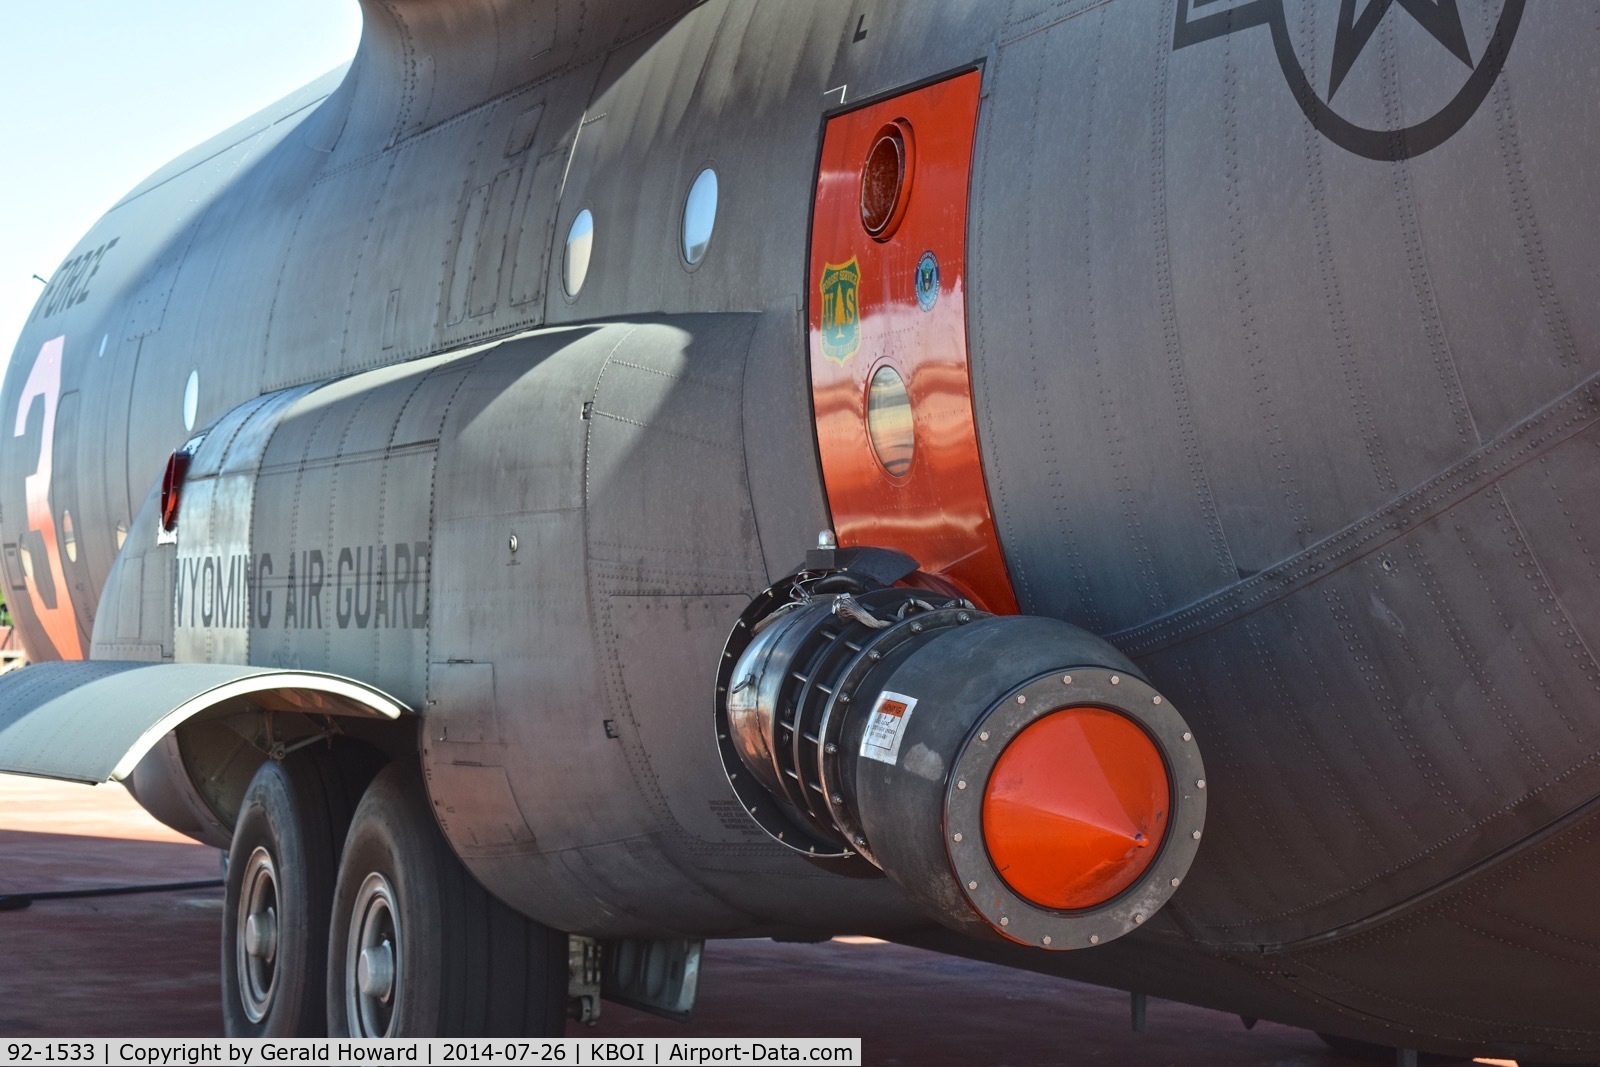 92-1533, 1992 Lockheed C-130H Hercules C/N 382-5322, MAFFS discharge nozzle on C-130h from the 153rd Airlift Wing, WY ANG.